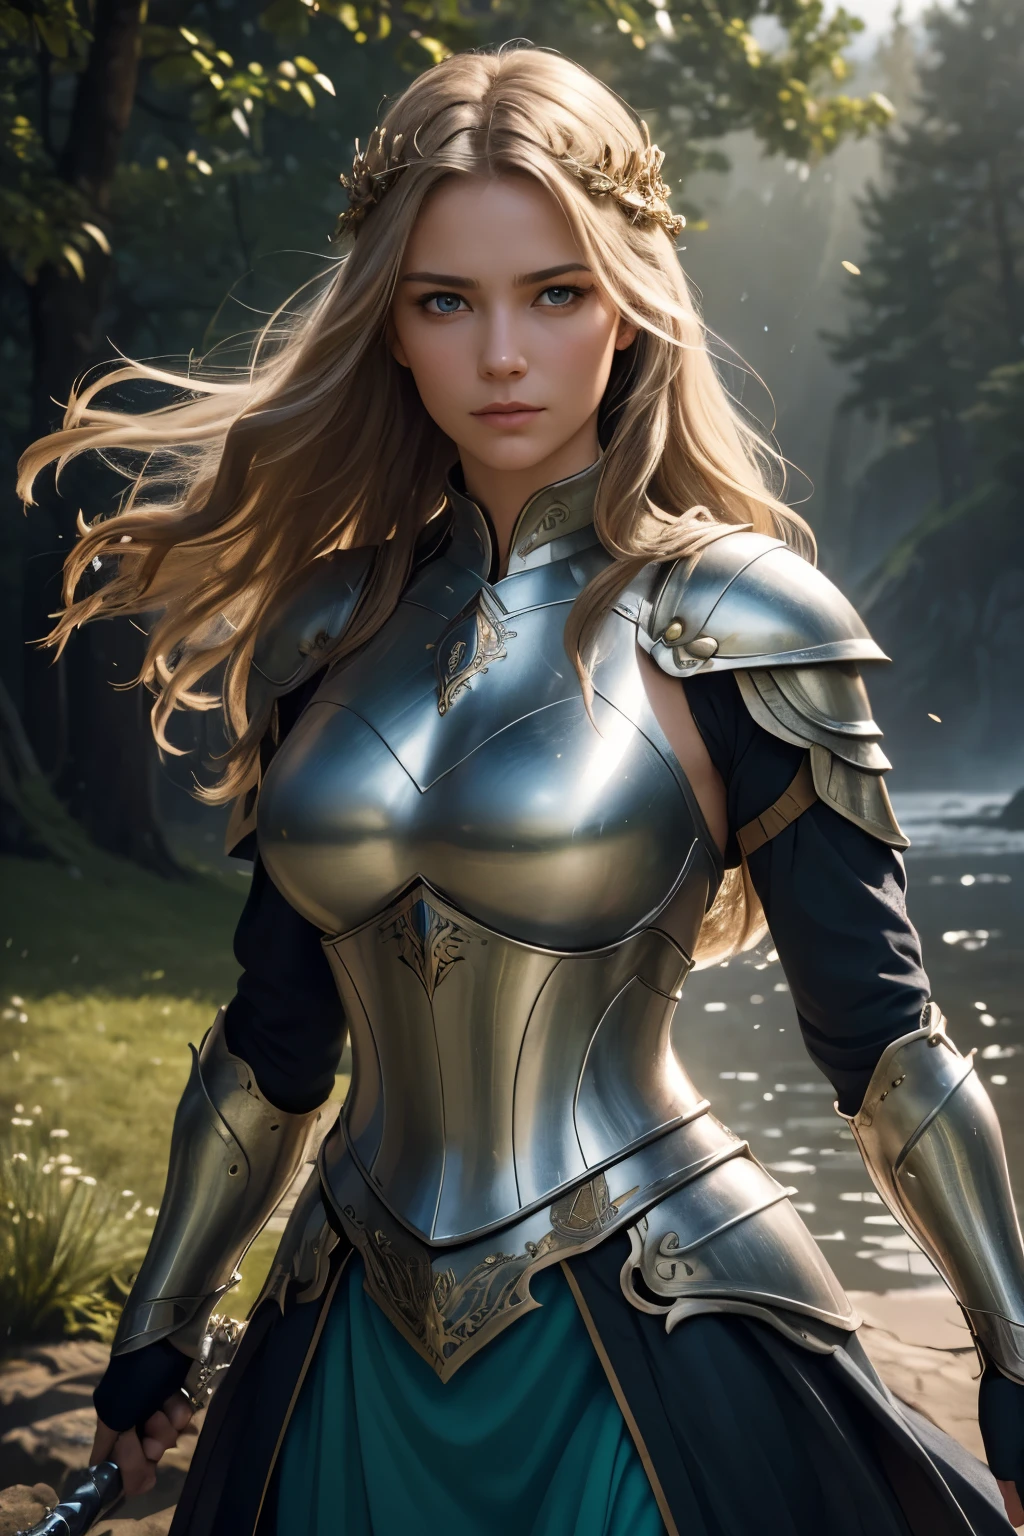 (best quality,4k,8k,highres,masterpiece:1.2),ultra-detailed,(realistic,photorealistic,photo-realistic:1.37),beautiful girl in medieval armor,sharp focus,physically-based rendering,professional,vivid colors,bokeh,armor's texture shining,elaborate golden patterns,medieval castle background,fierce and determined expression,shimmering sunlight on the armor,soft and lush flowing hair,sparkling blue eyes,strong and regal posture,glowing sword in her hand,armor reflecting nature landscape,hint of fog adding mysterious atmosphere,subtle shades of green and brown,soft warm lighting,gentle breeze blowing her hair,possession of strong will and courage,reminiscent of valor and chivalry,romantic ambiance,impressive and awe-inspiring presence,determined to protect her kingdom and loved ones,symbol of strength and beauty,contrast between delicate femininity and formidable strength